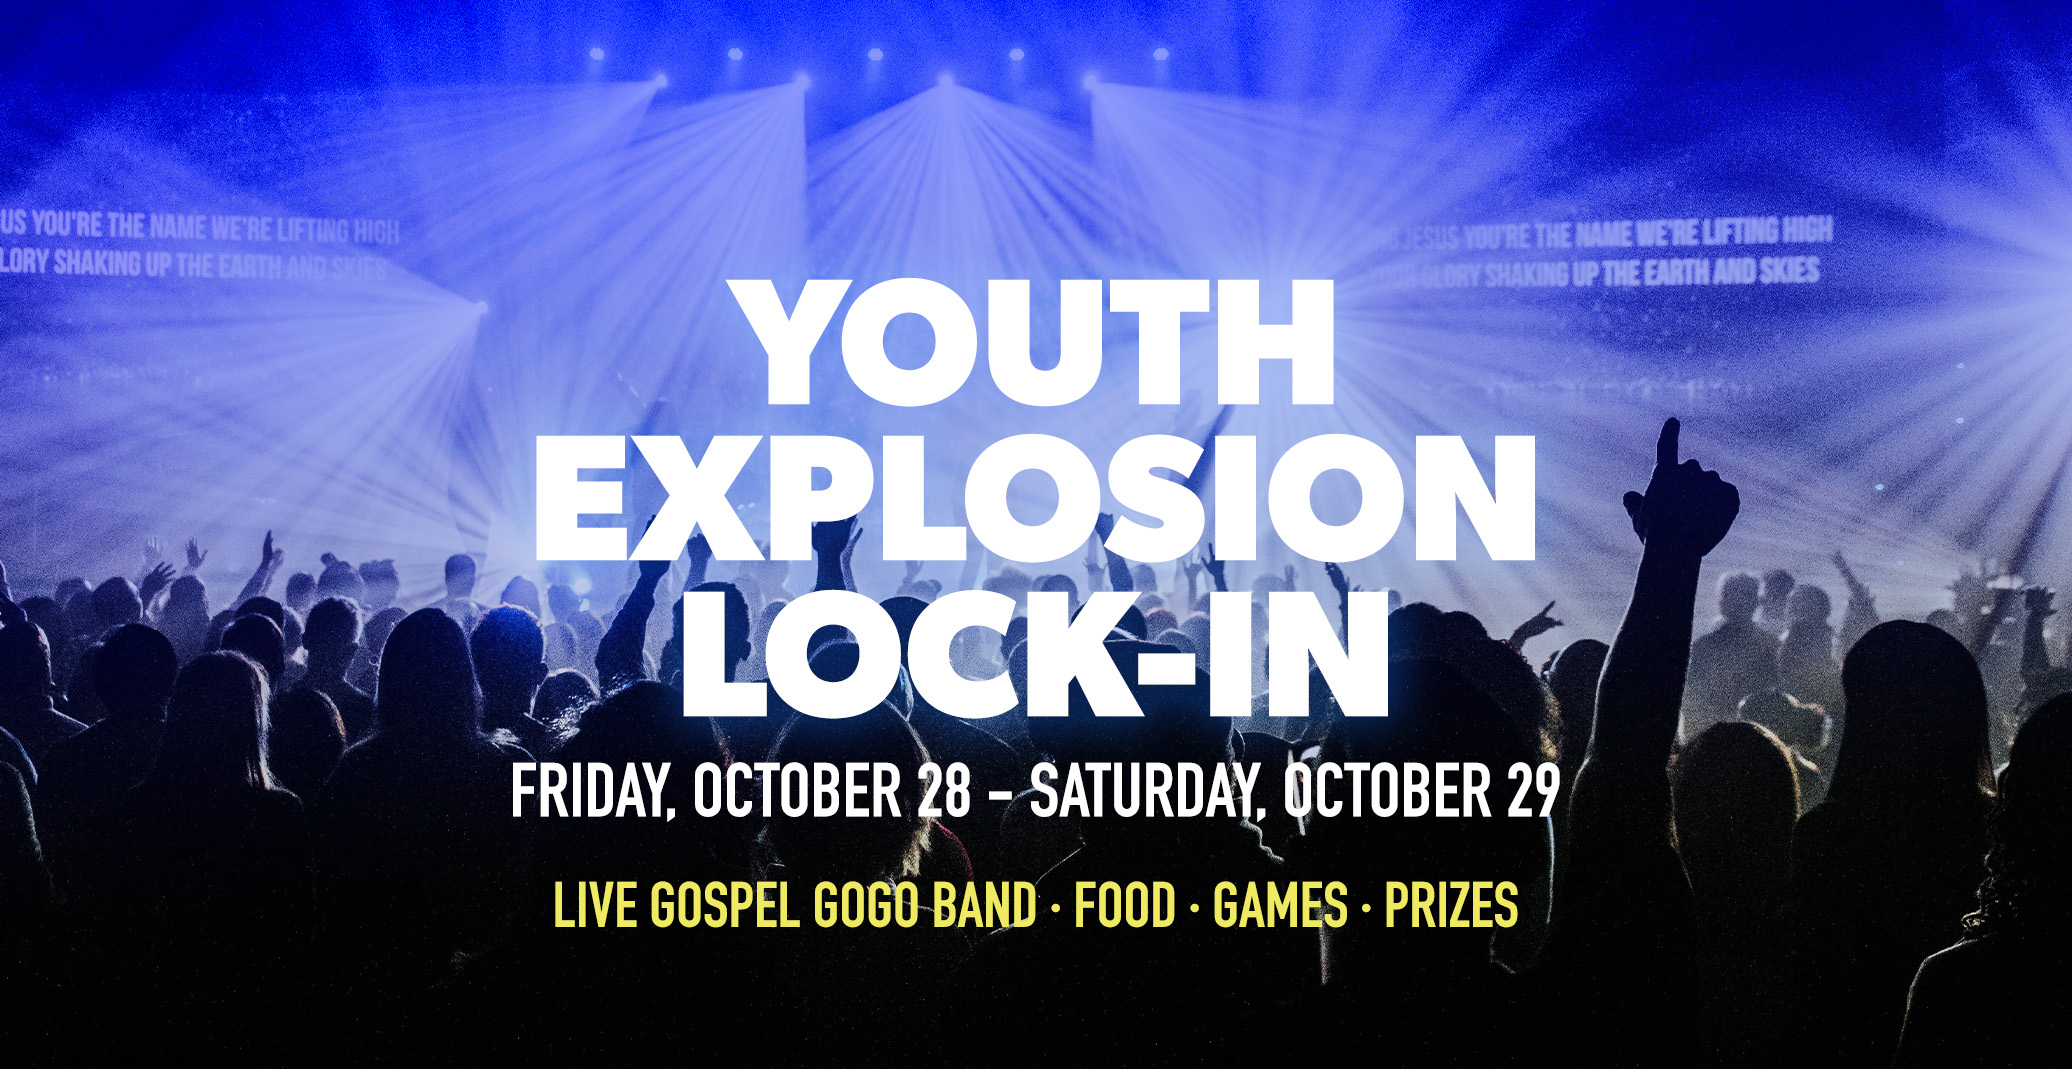 Youth Explosion Lock-In flyer